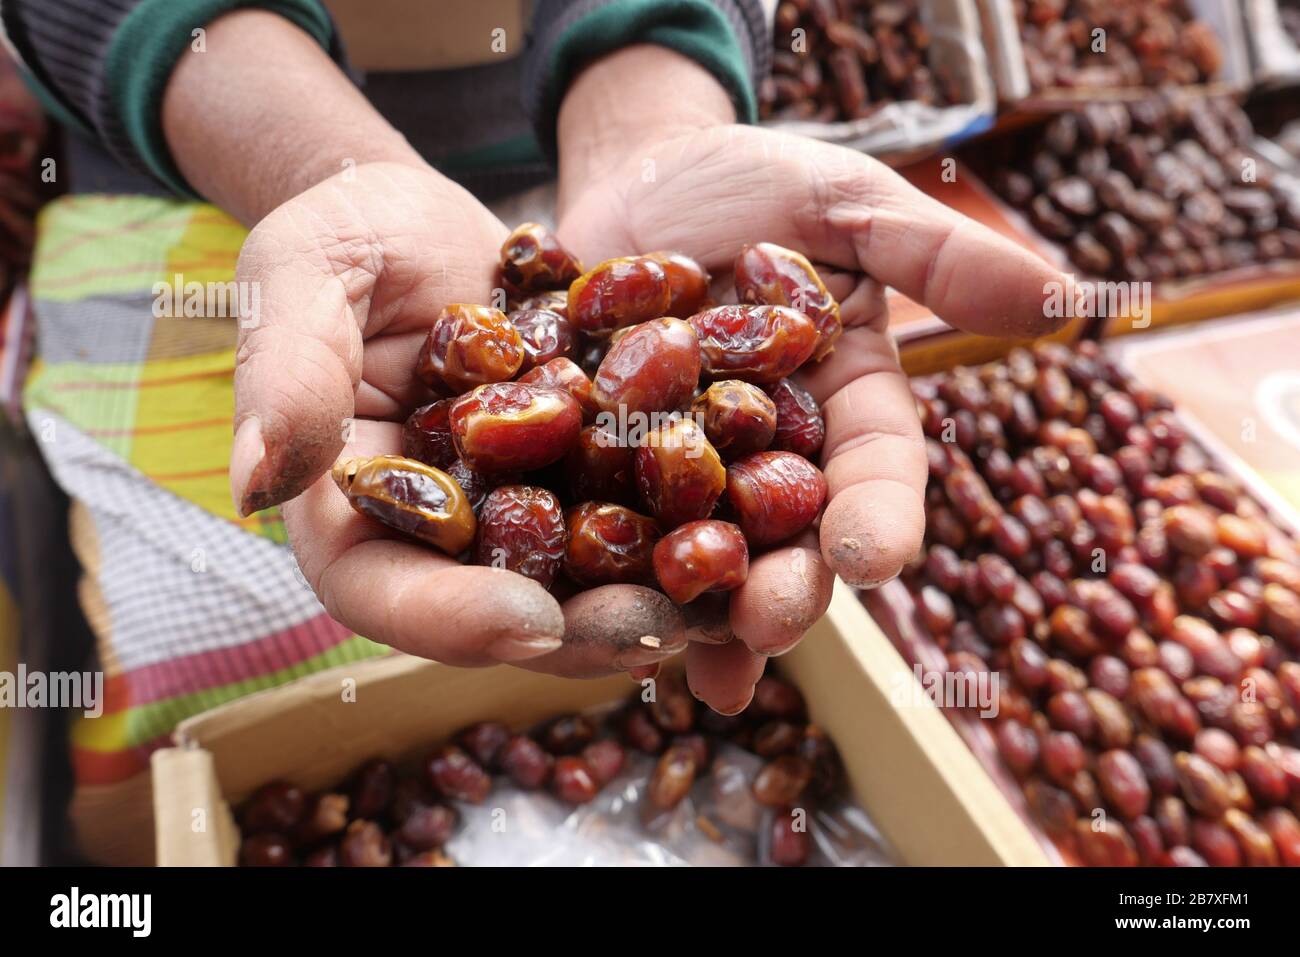 man hand holding date fruit for sale  Stock Photo